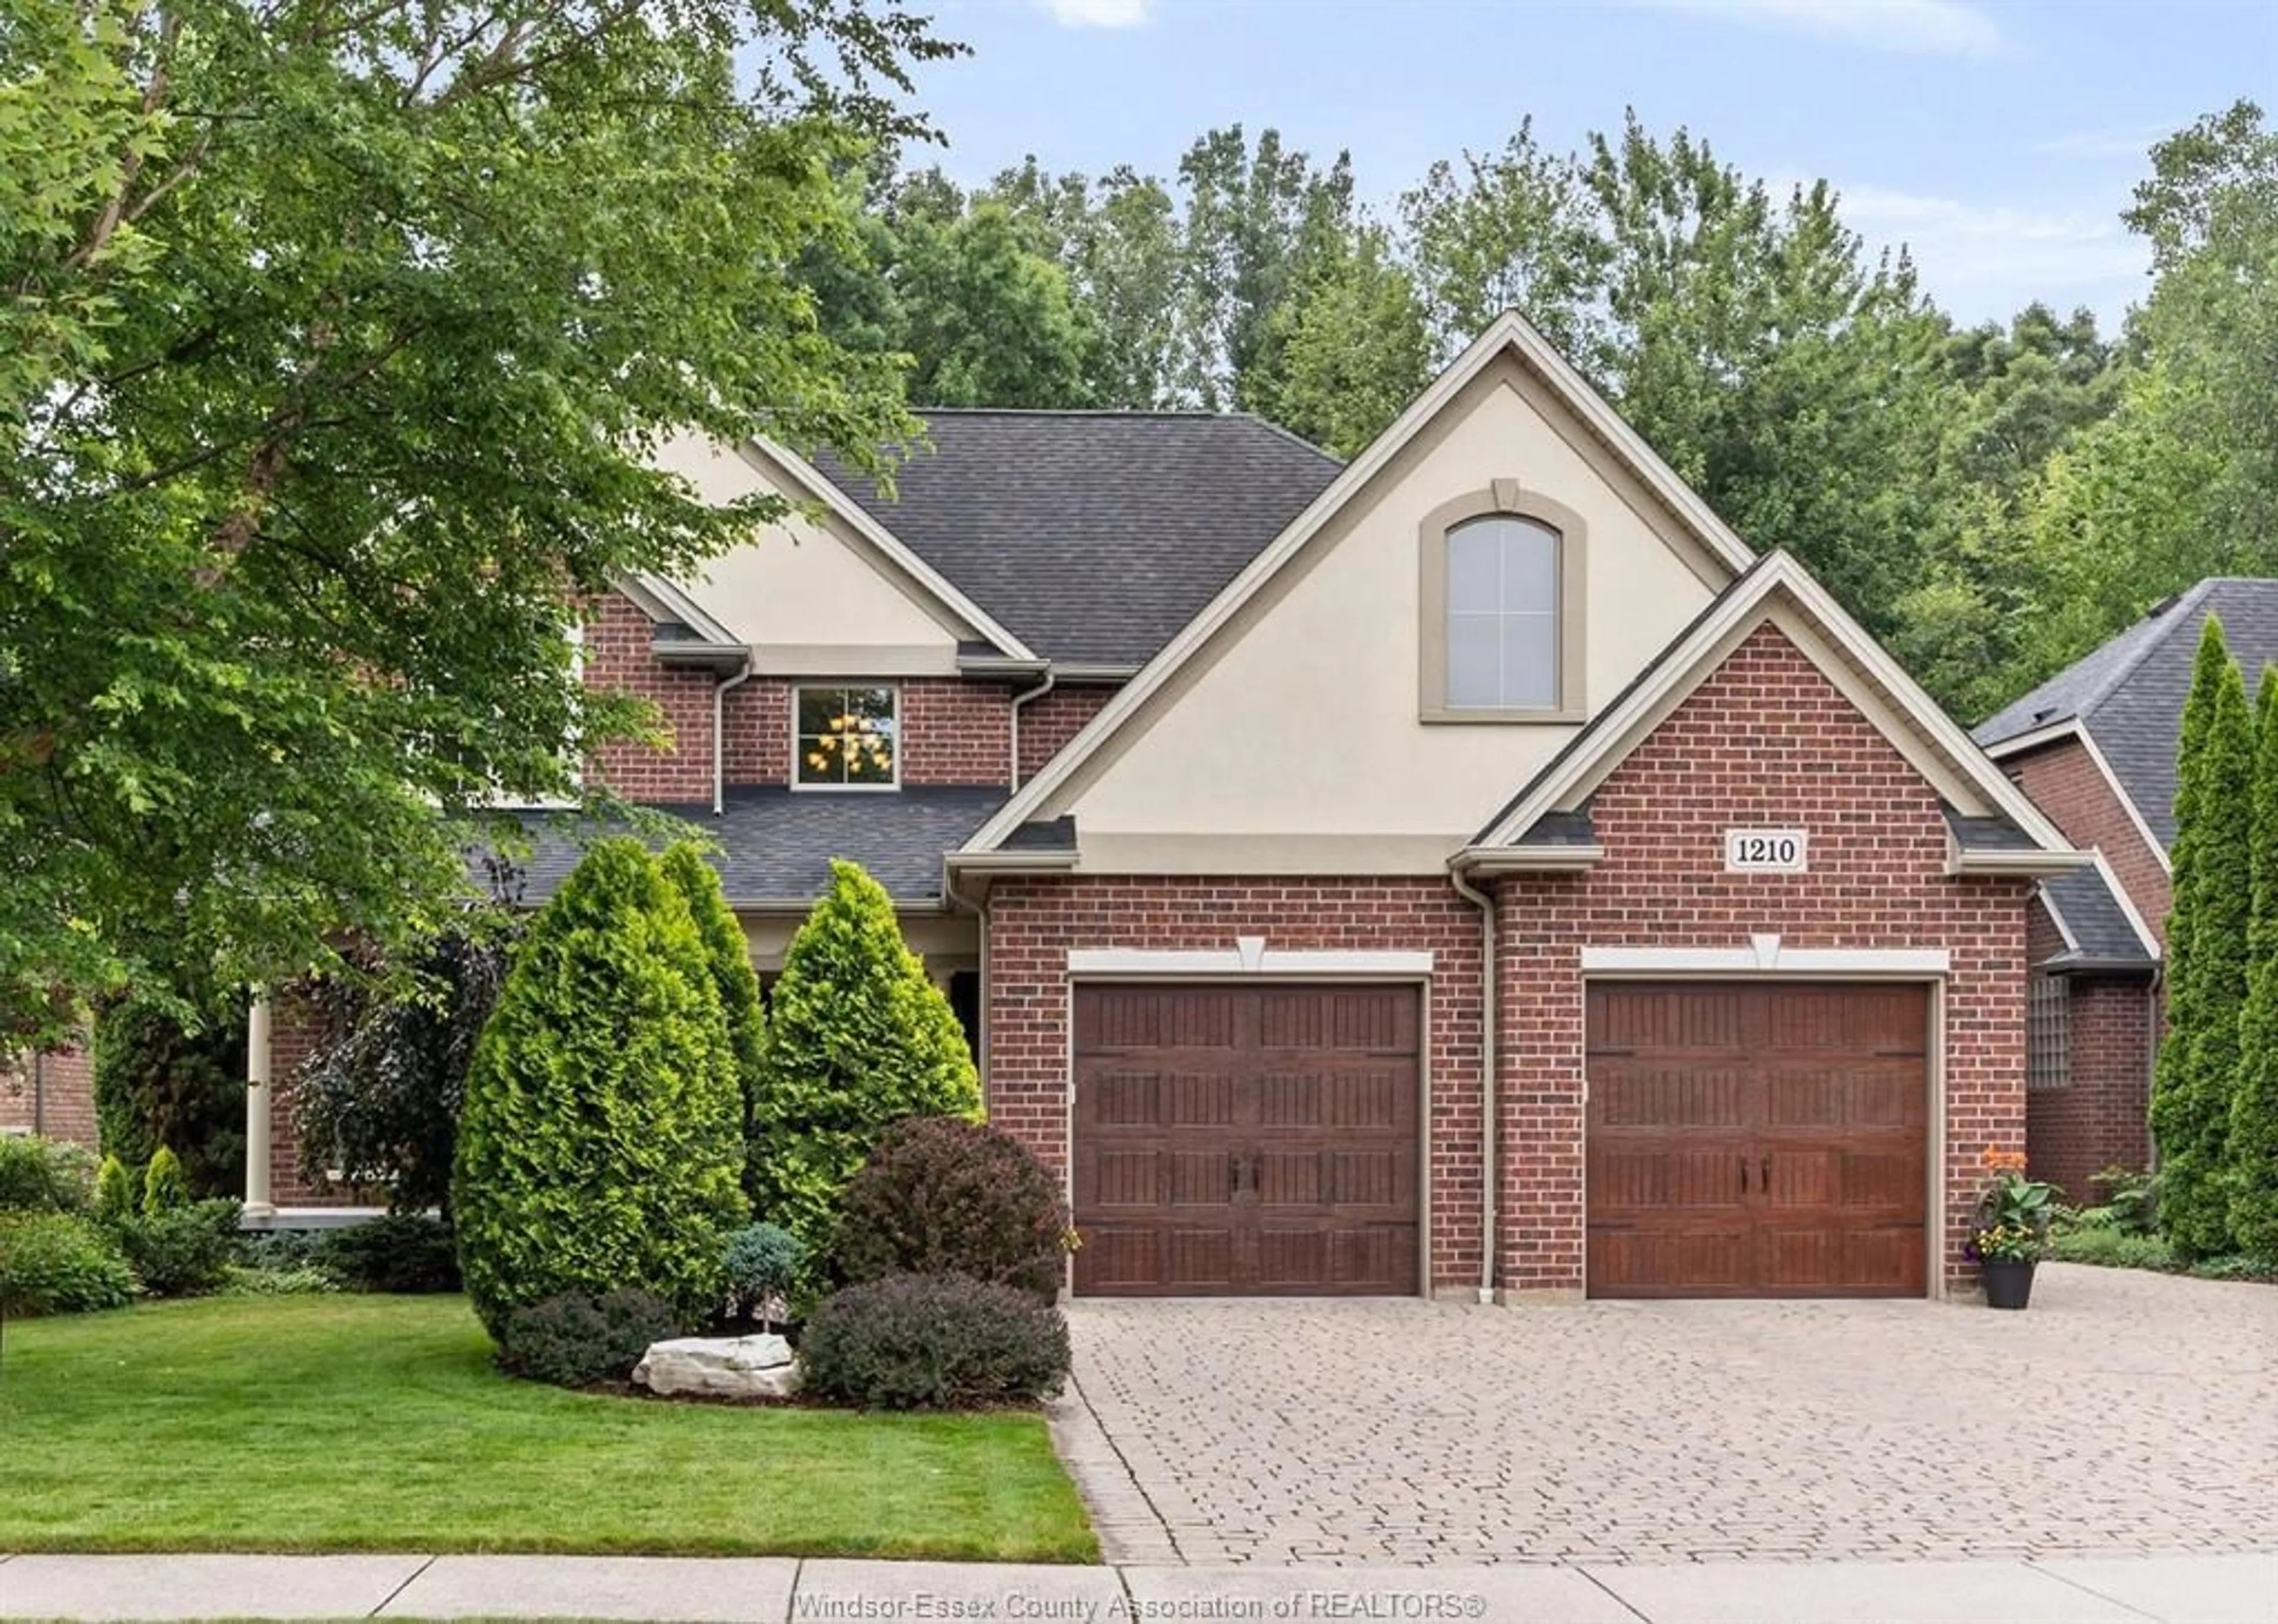 Home with brick exterior material for 1210 DEERVIEW, LaSalle Ontario N9J 0A2